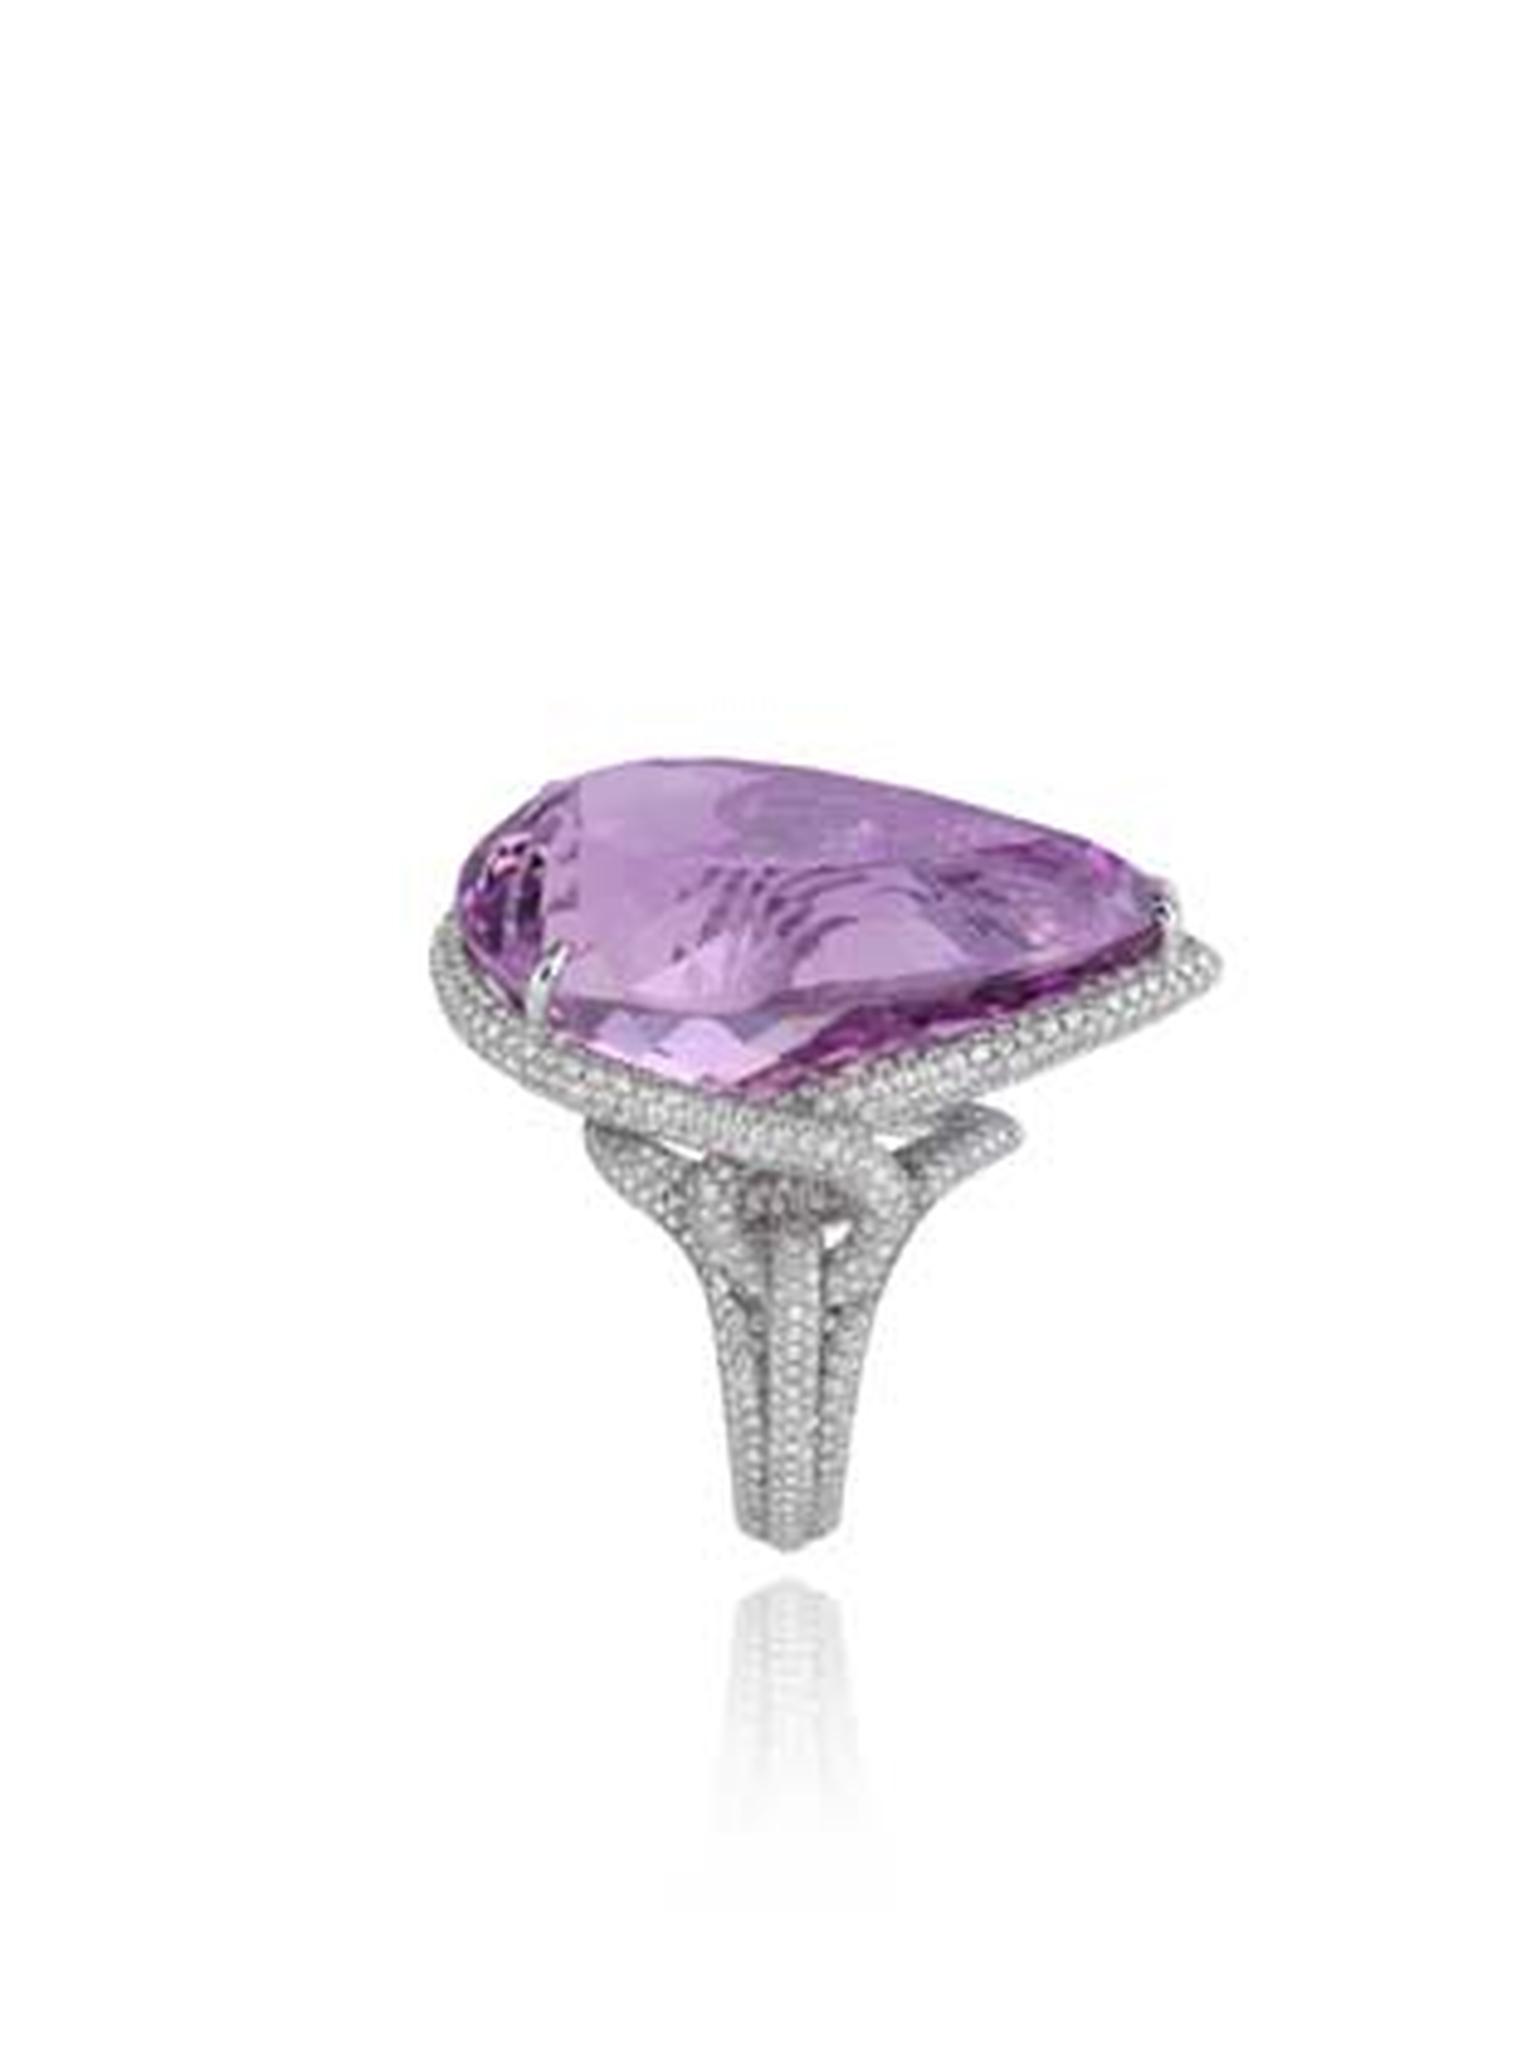 829174-1002 Kunzite Ring  from the Red Carpet Collection 2013.jpg